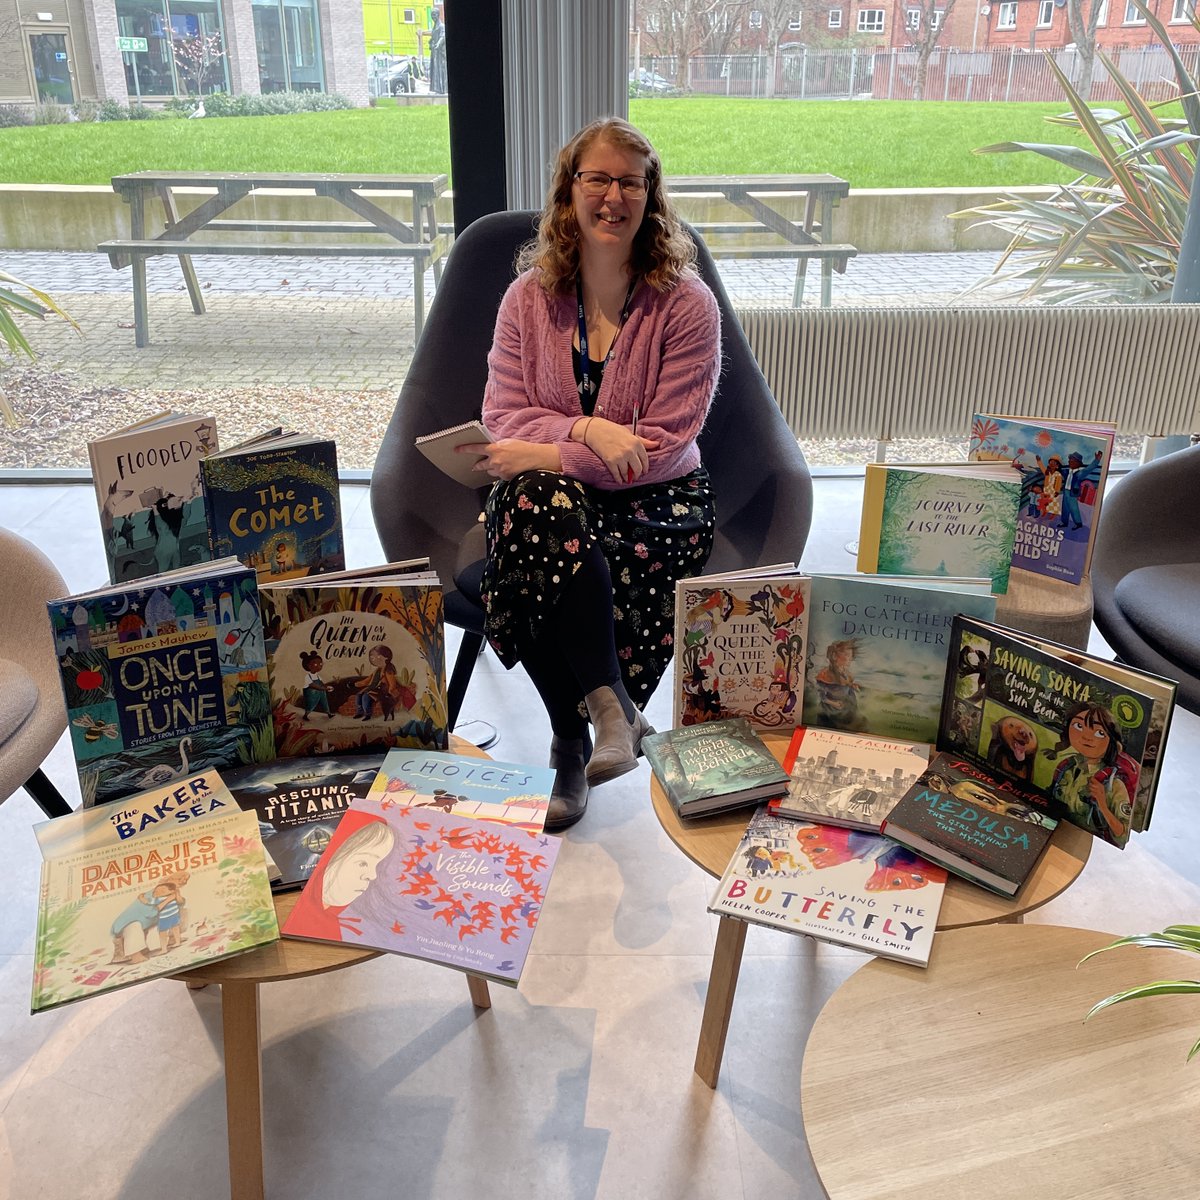 🎉The #YotoCarnegies23 Shortlist will be announced tomorrow 17th March.
📅Join Carnegie Judge and LJMU Librarian Gemma, who will be unveiling the shortlisted books in Avril Library on the 17th, and Aldham Library on Monday the 20th; both at 2.00pm
Website: yotocarnegies.co.uk